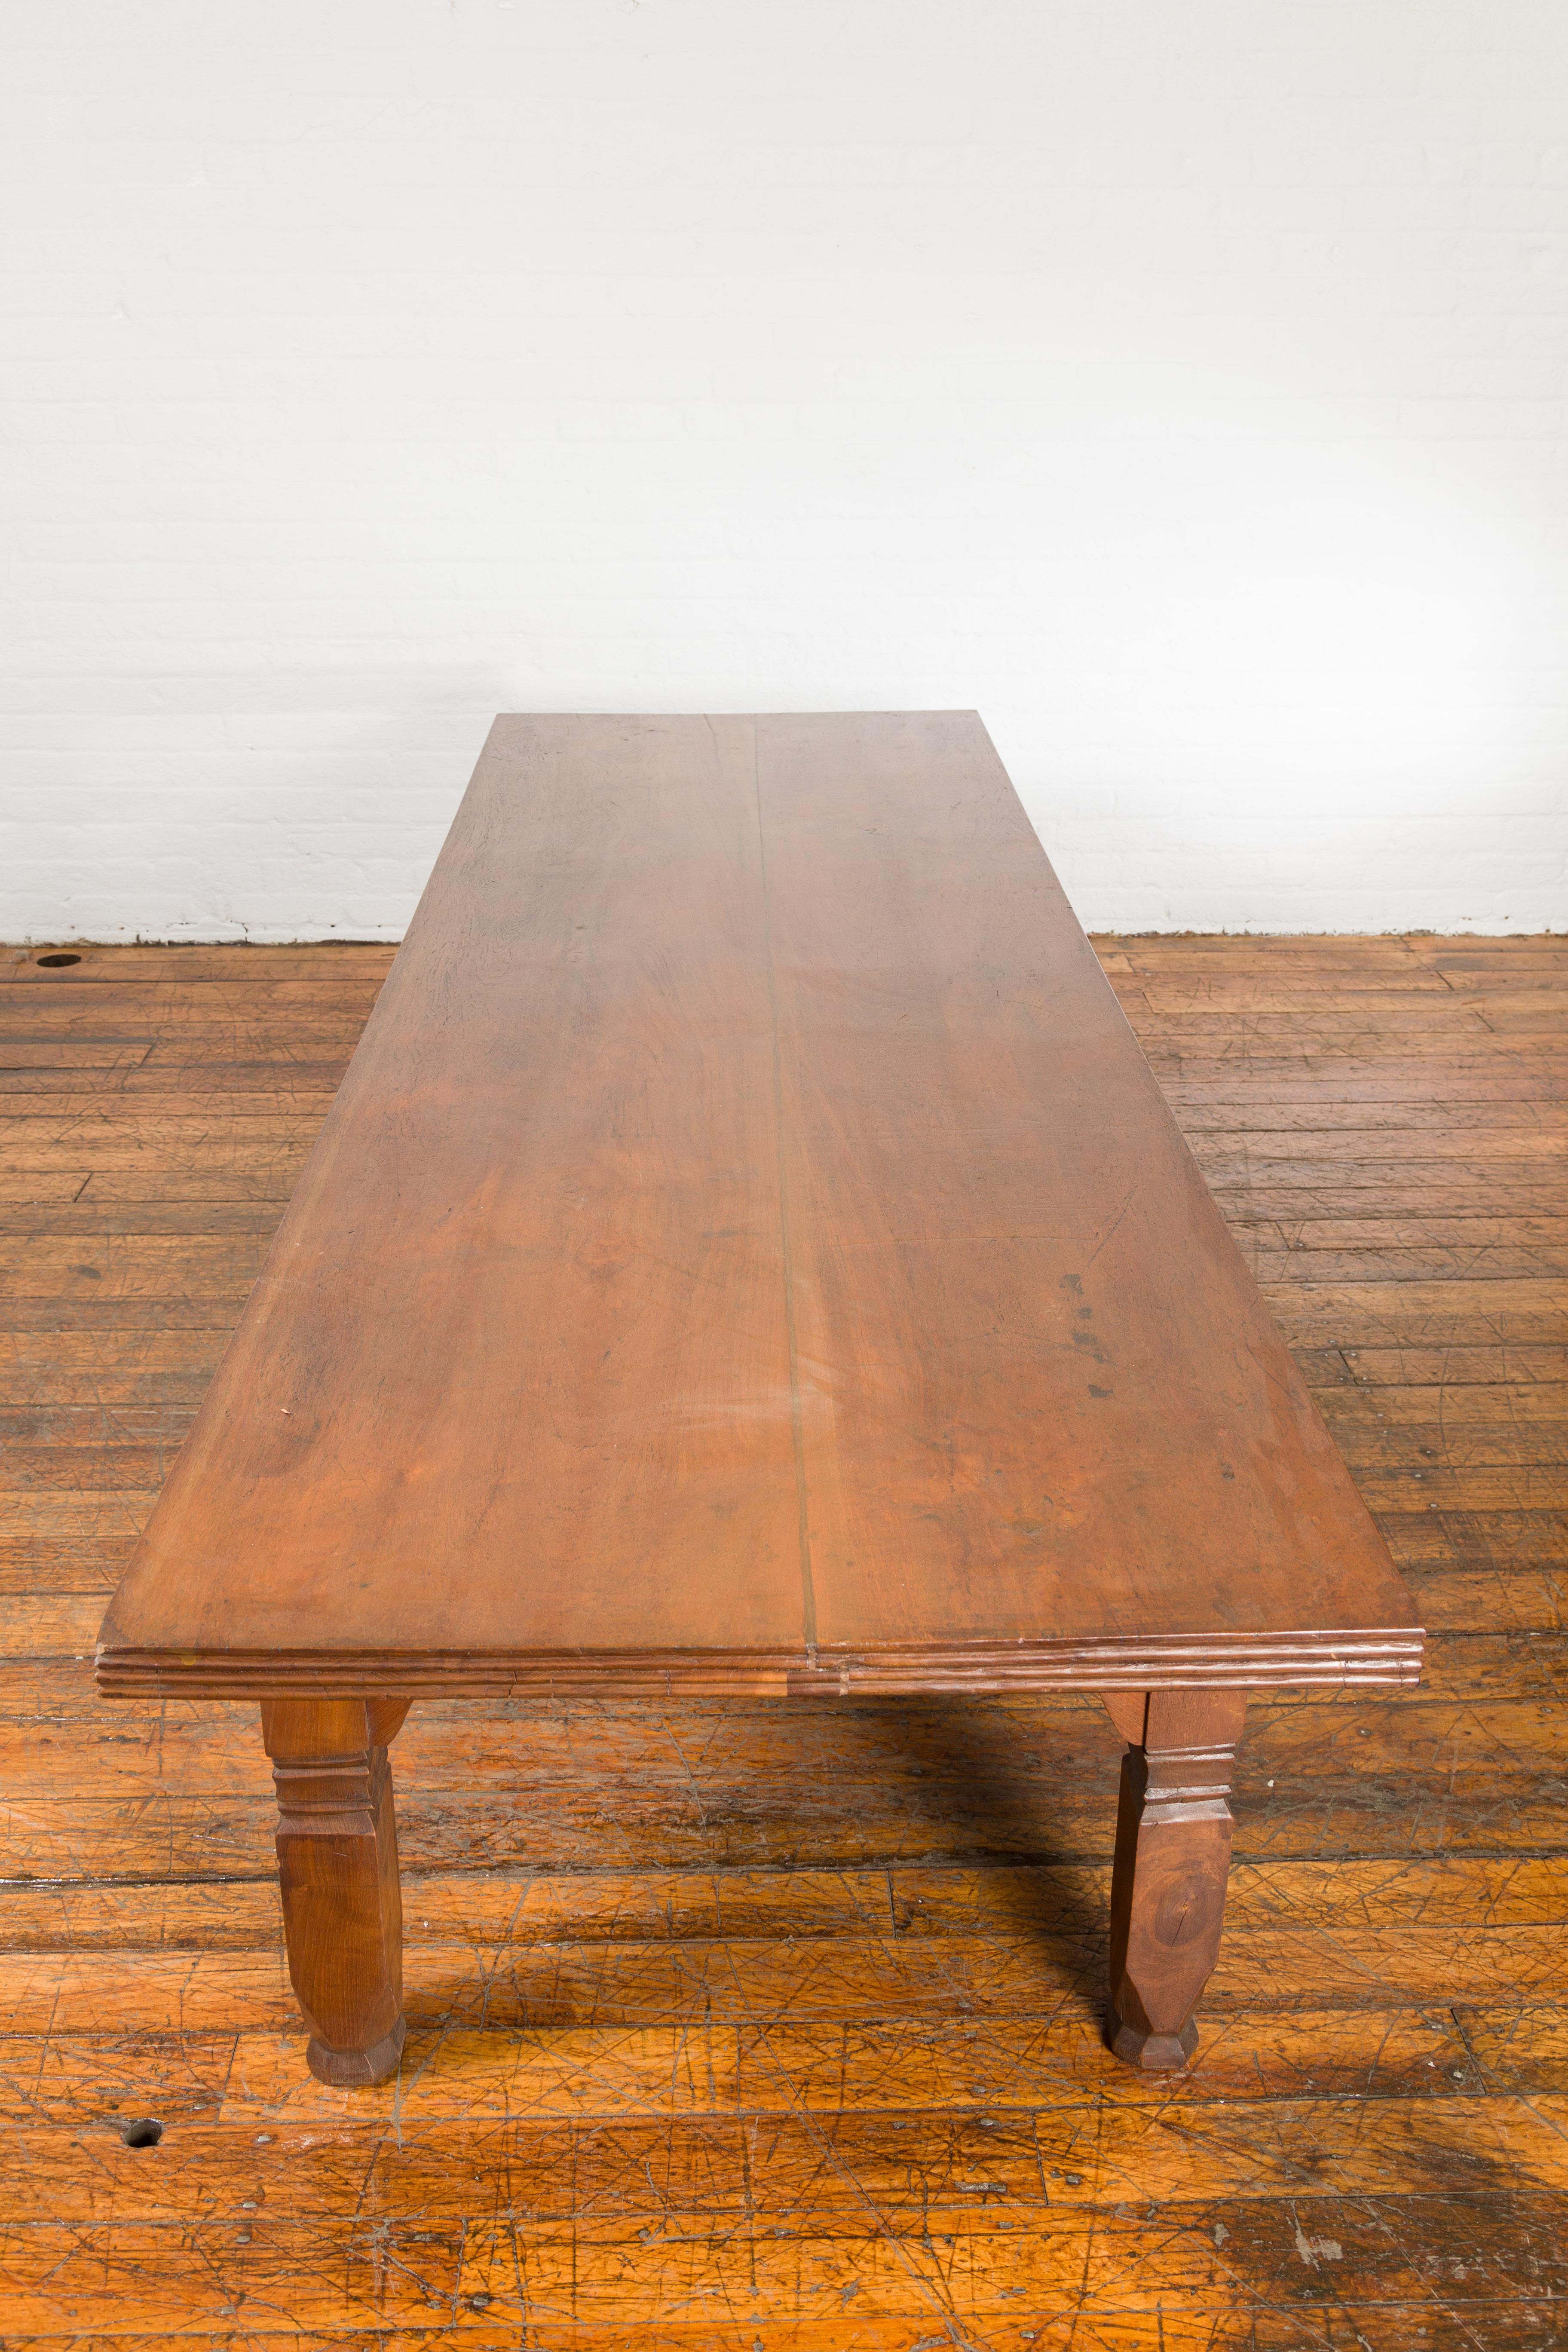 Oversized 19th Century Indonesian Coffee Table with Reeded Edge and Carved Legs For Sale 6